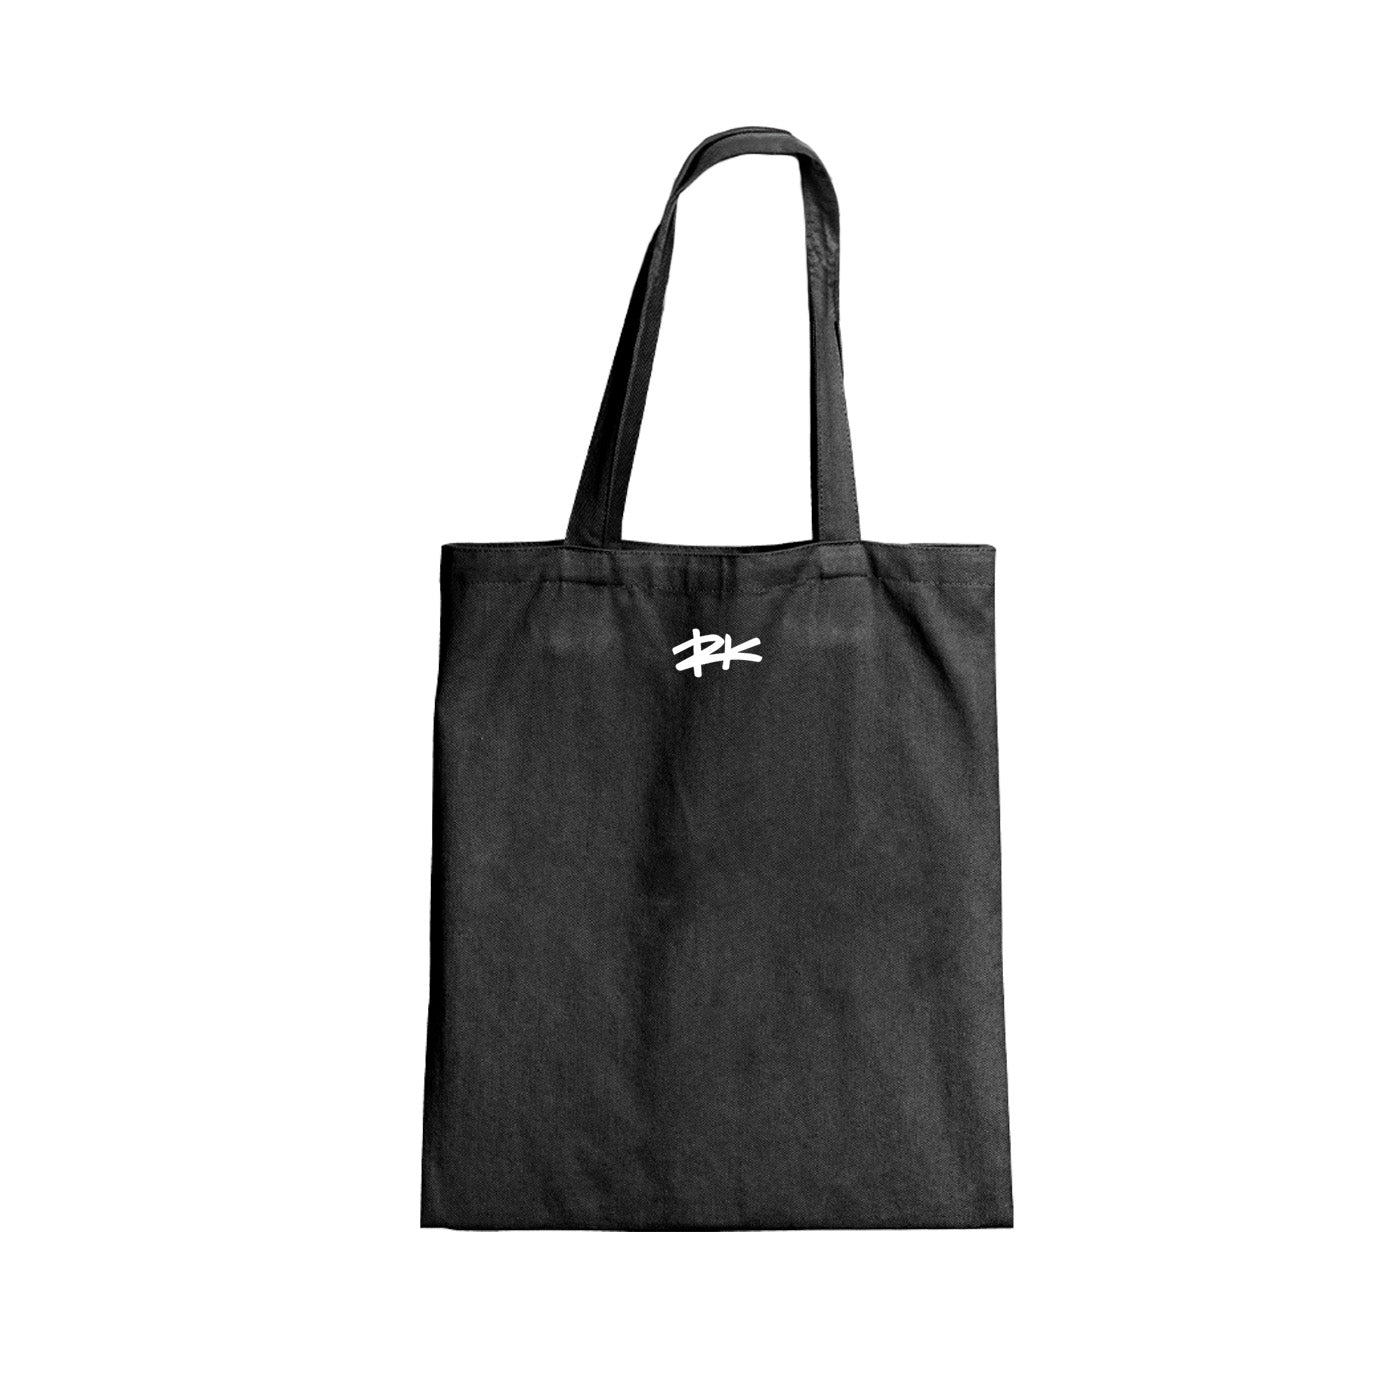 KULTURE SOUNDS RECORD TOTE